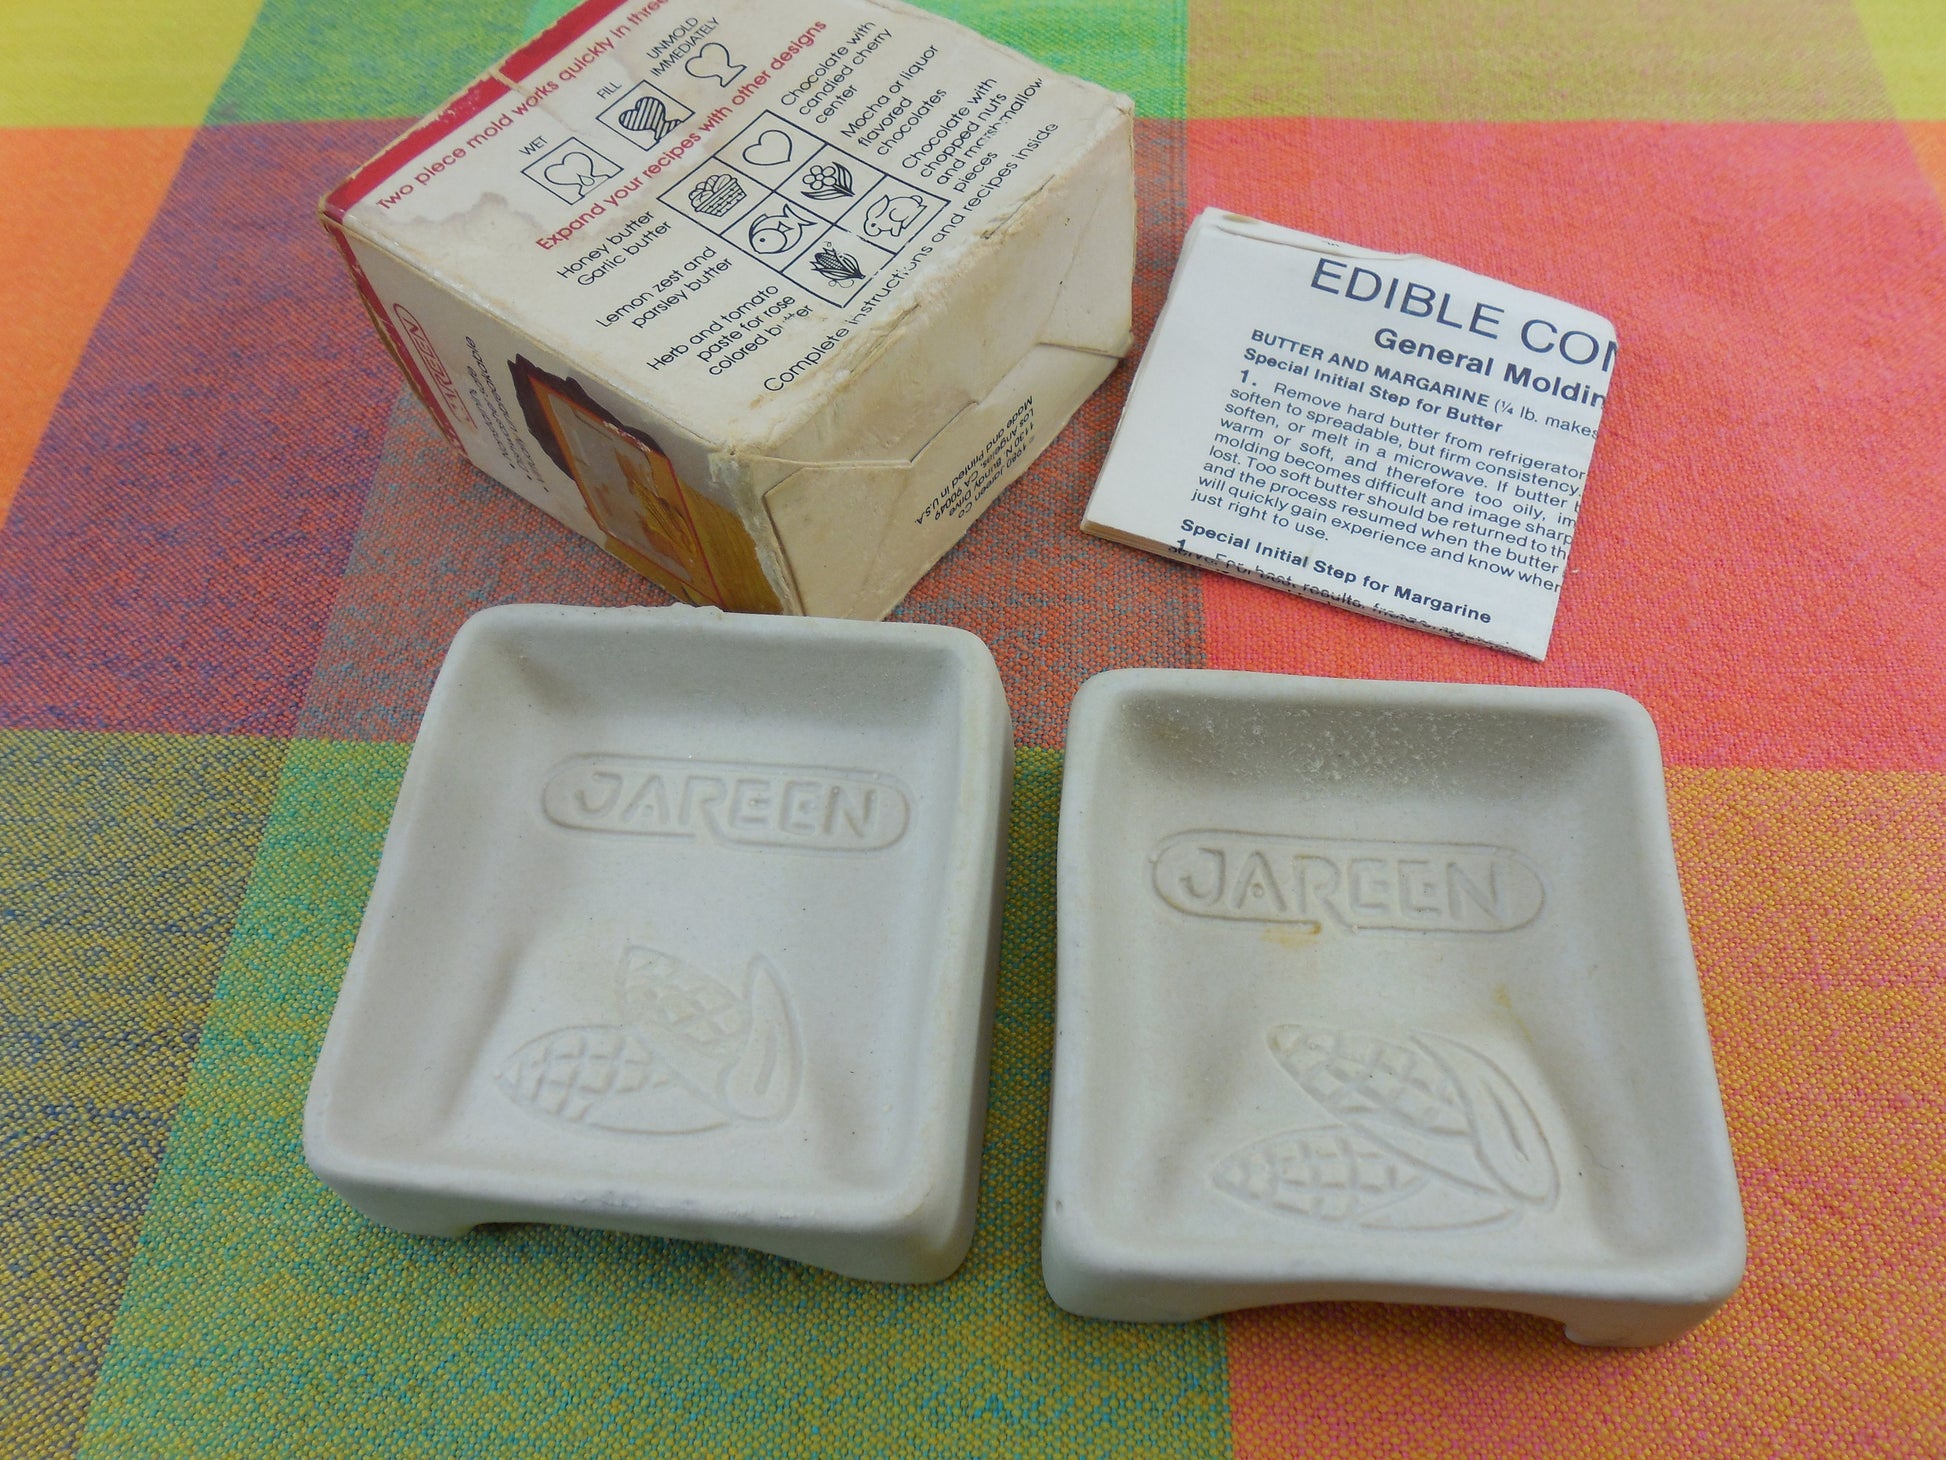 Jareen Edible Compliments Boxed Porcelain Mold Butter Chocolate - Corn Cob - Vintage 1980 with instructions